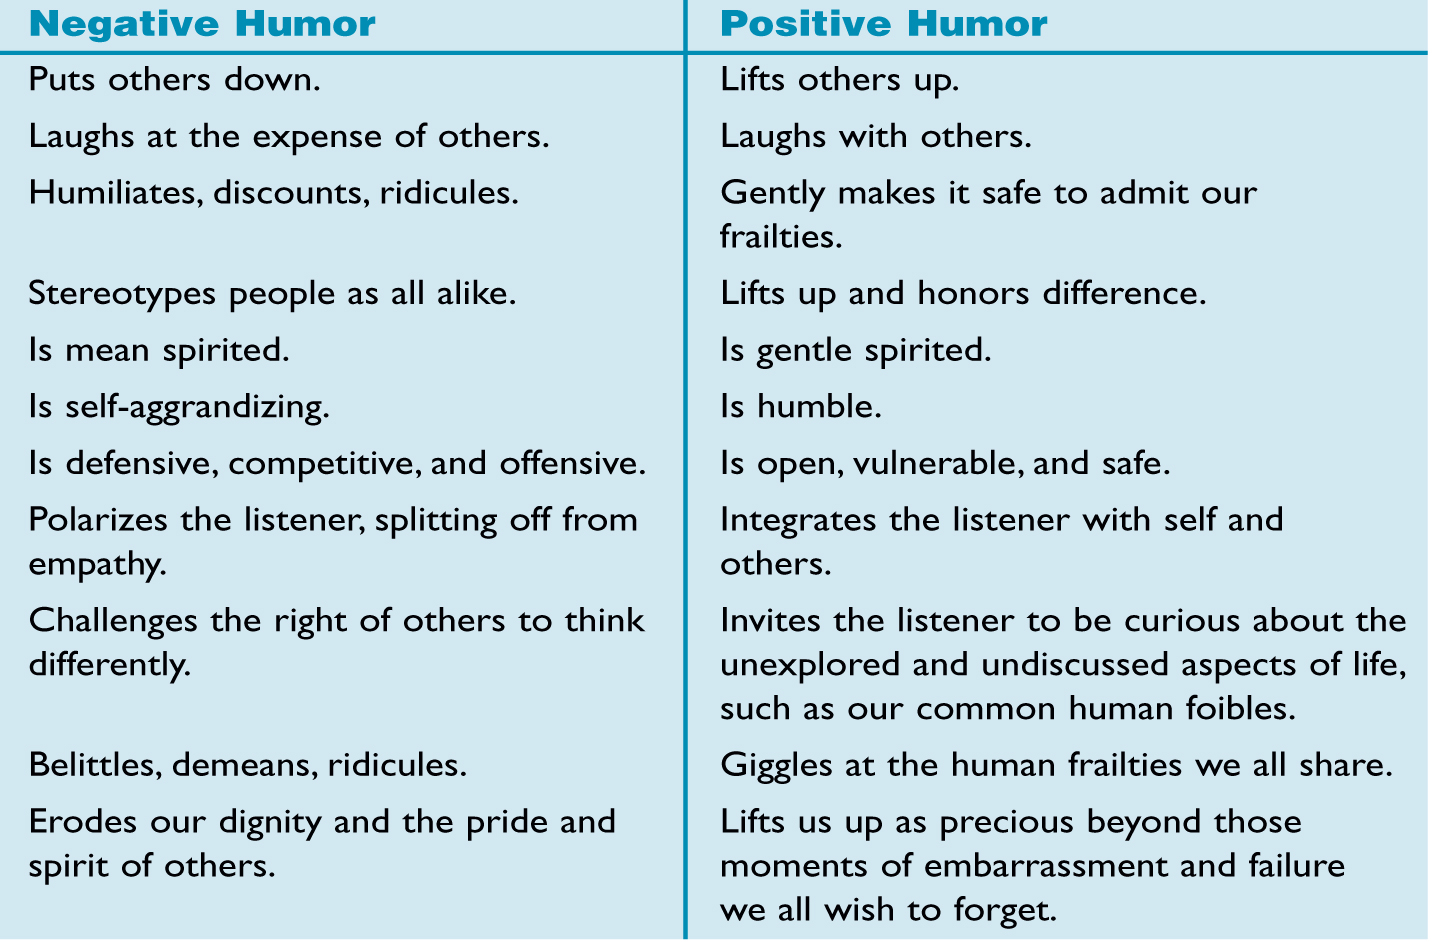 THE DIFFERENT KINDS OF HUMOR